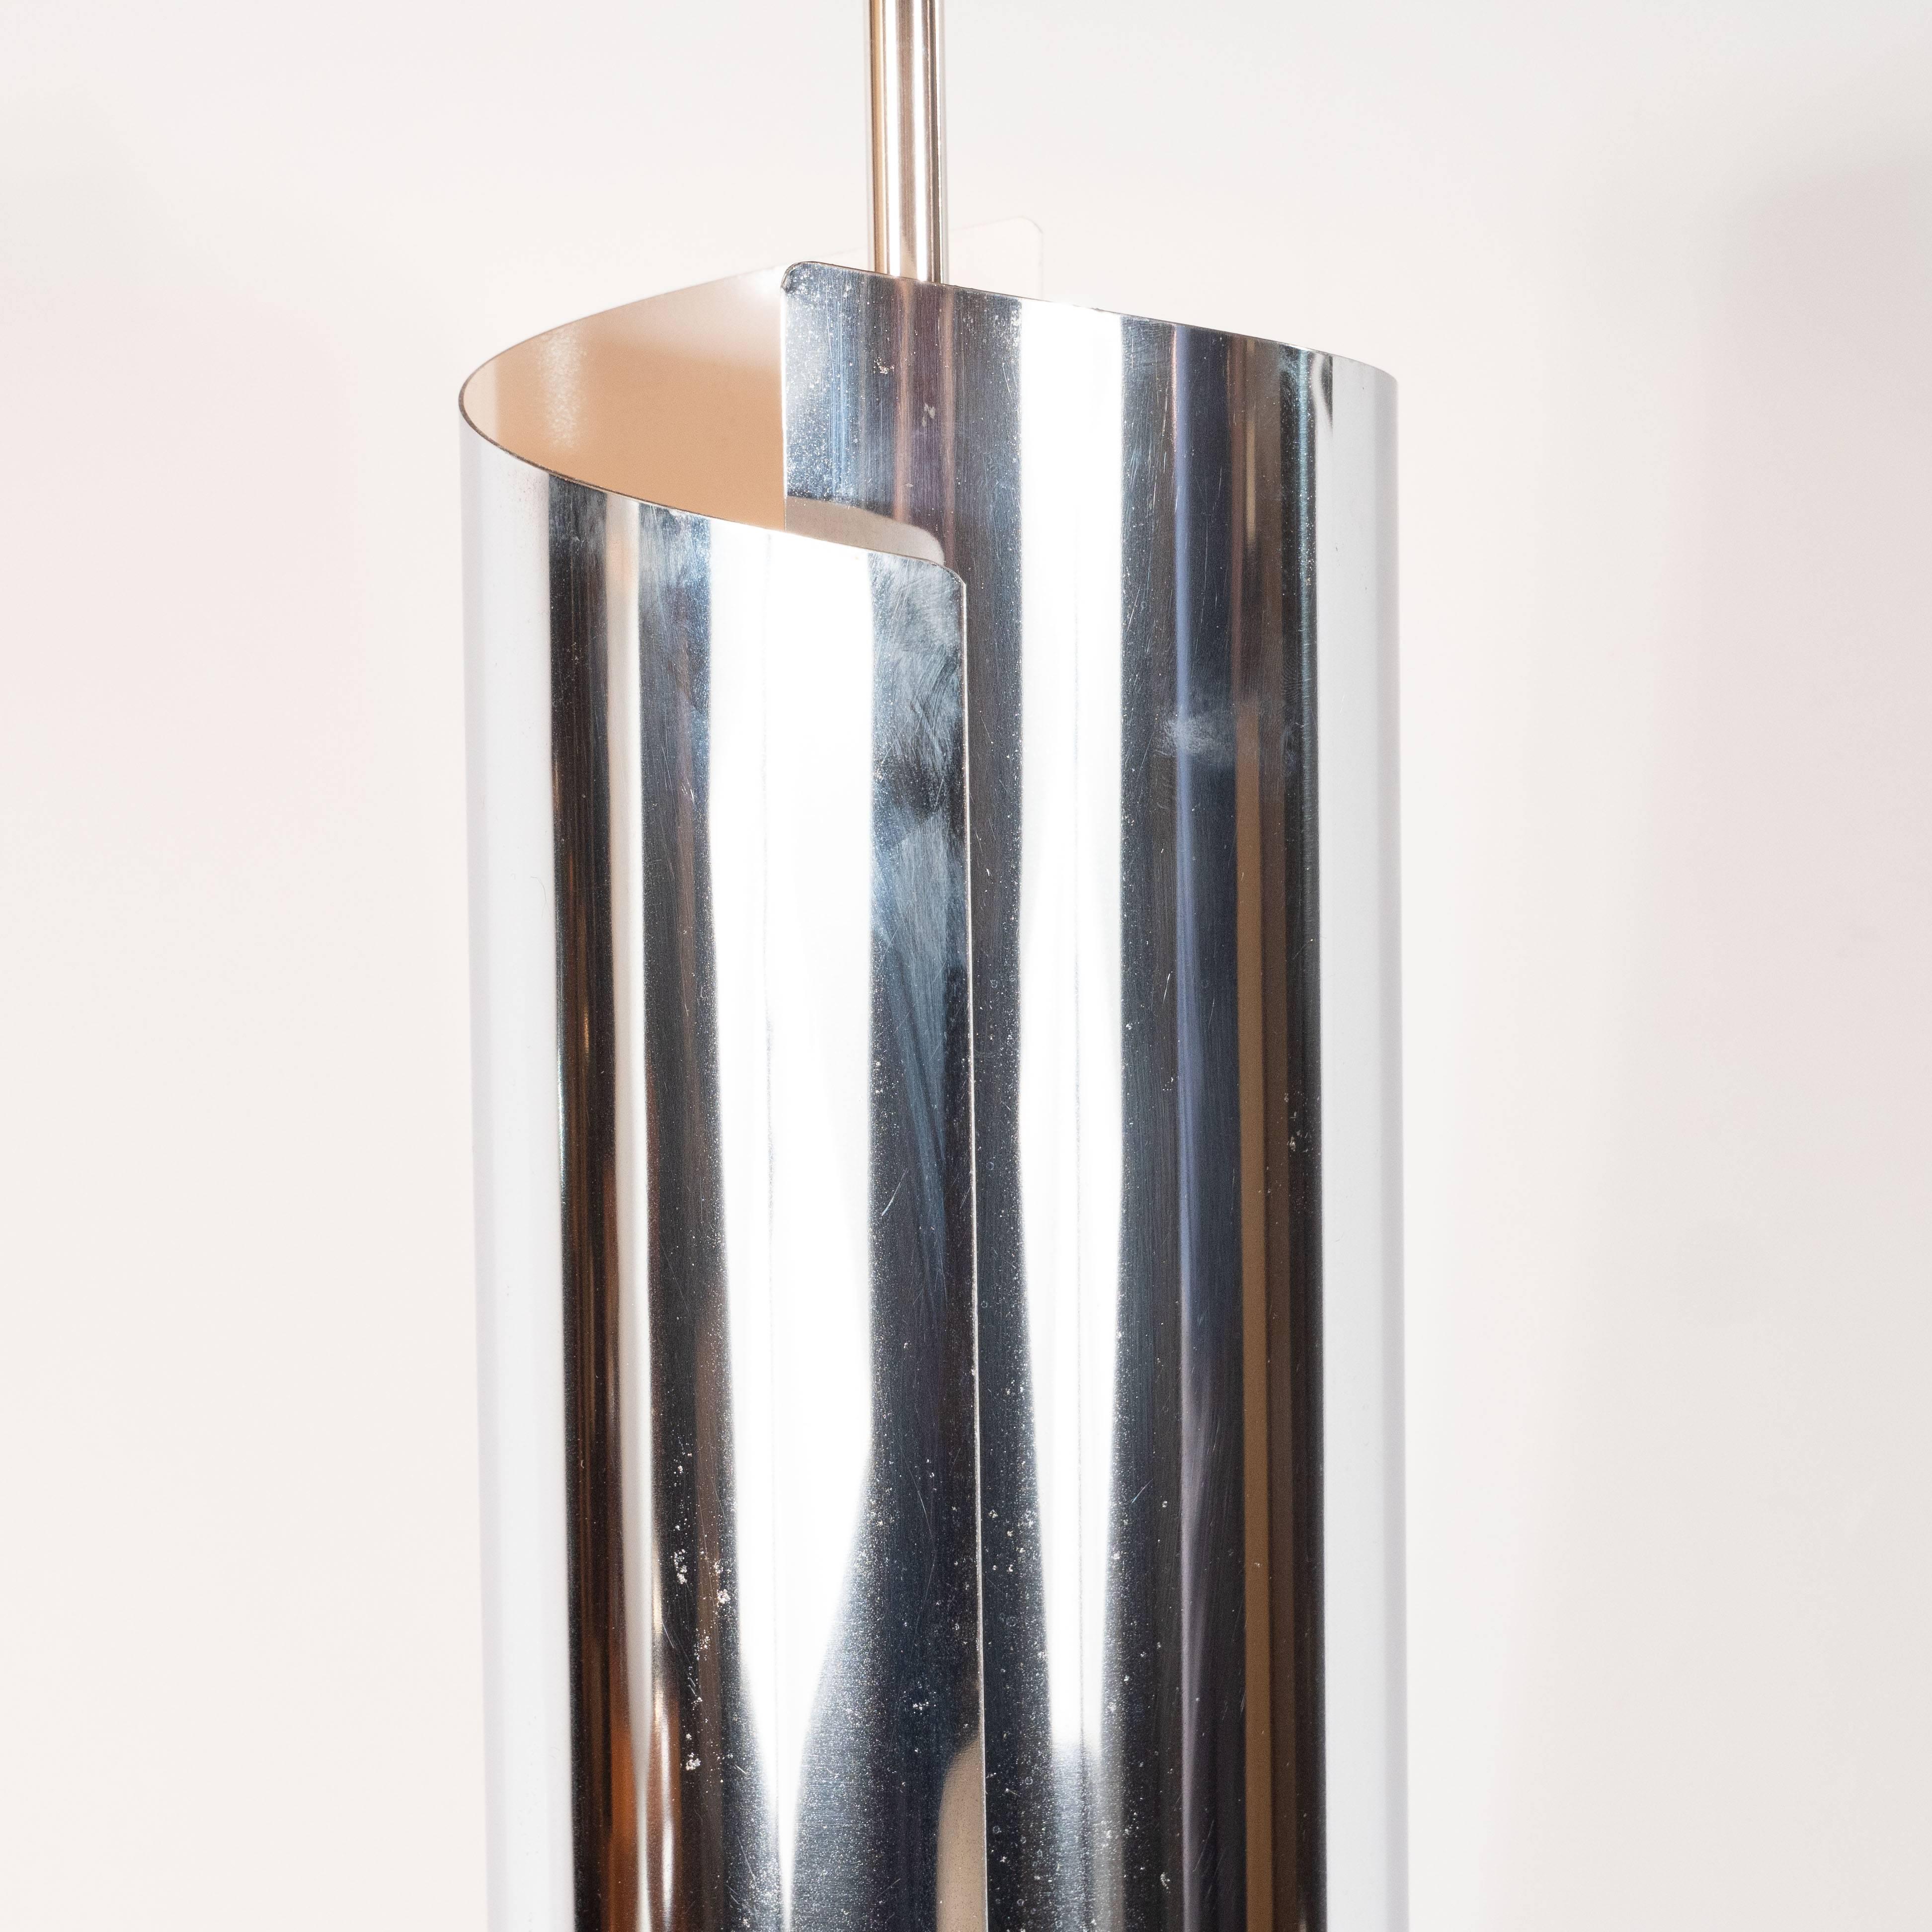 North American Mid-Century Modern Sculptural Chrome, Black and Cream Enamel Table Lamps